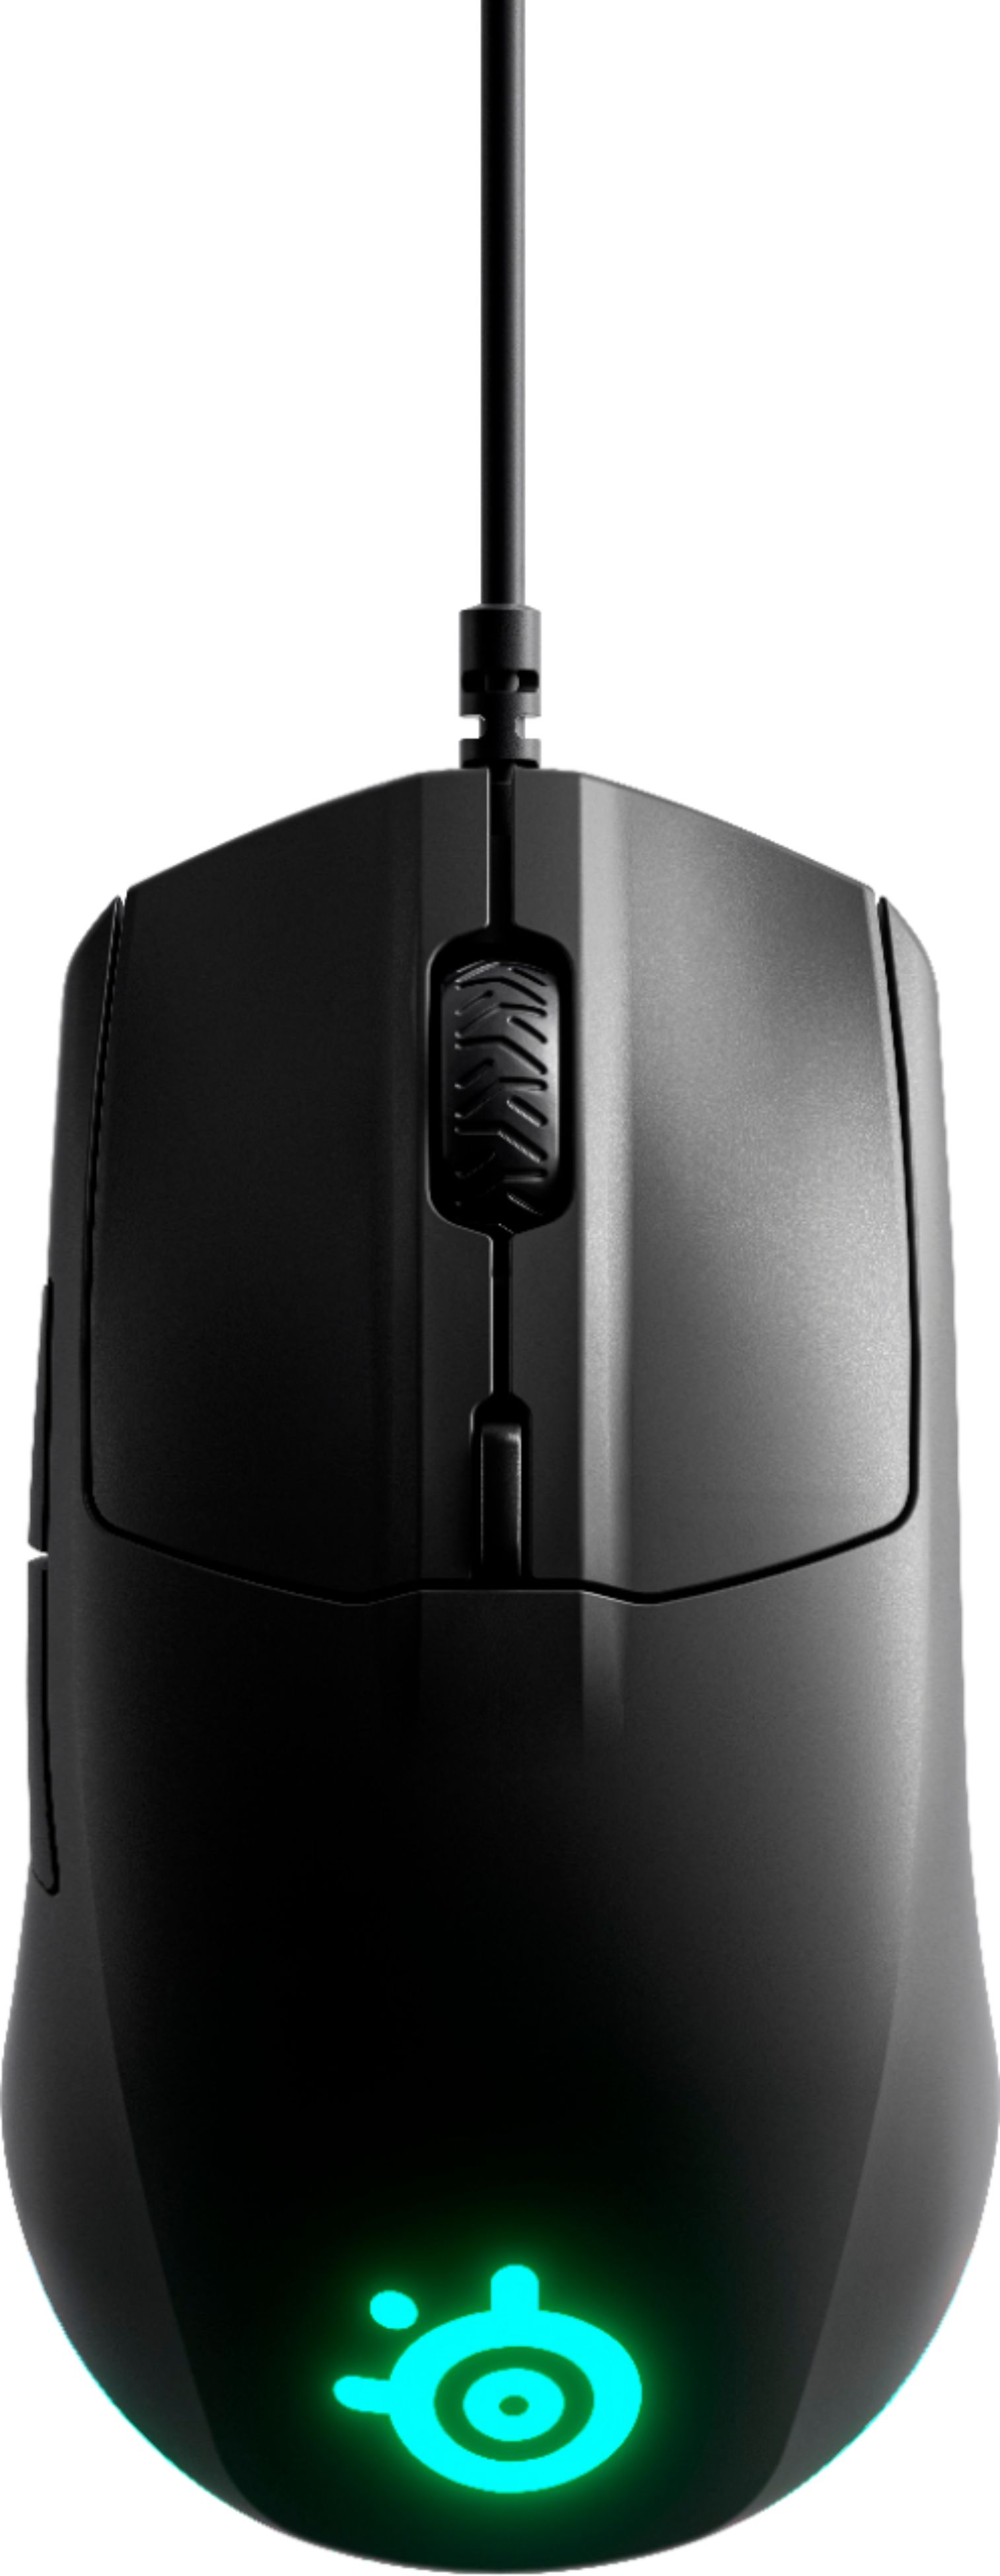 SteelSeries Rival - Wired 62513 Prism Lighting RGB Lightweight Gaming Buy 3 Brilliant Mouse Best Optical Black with